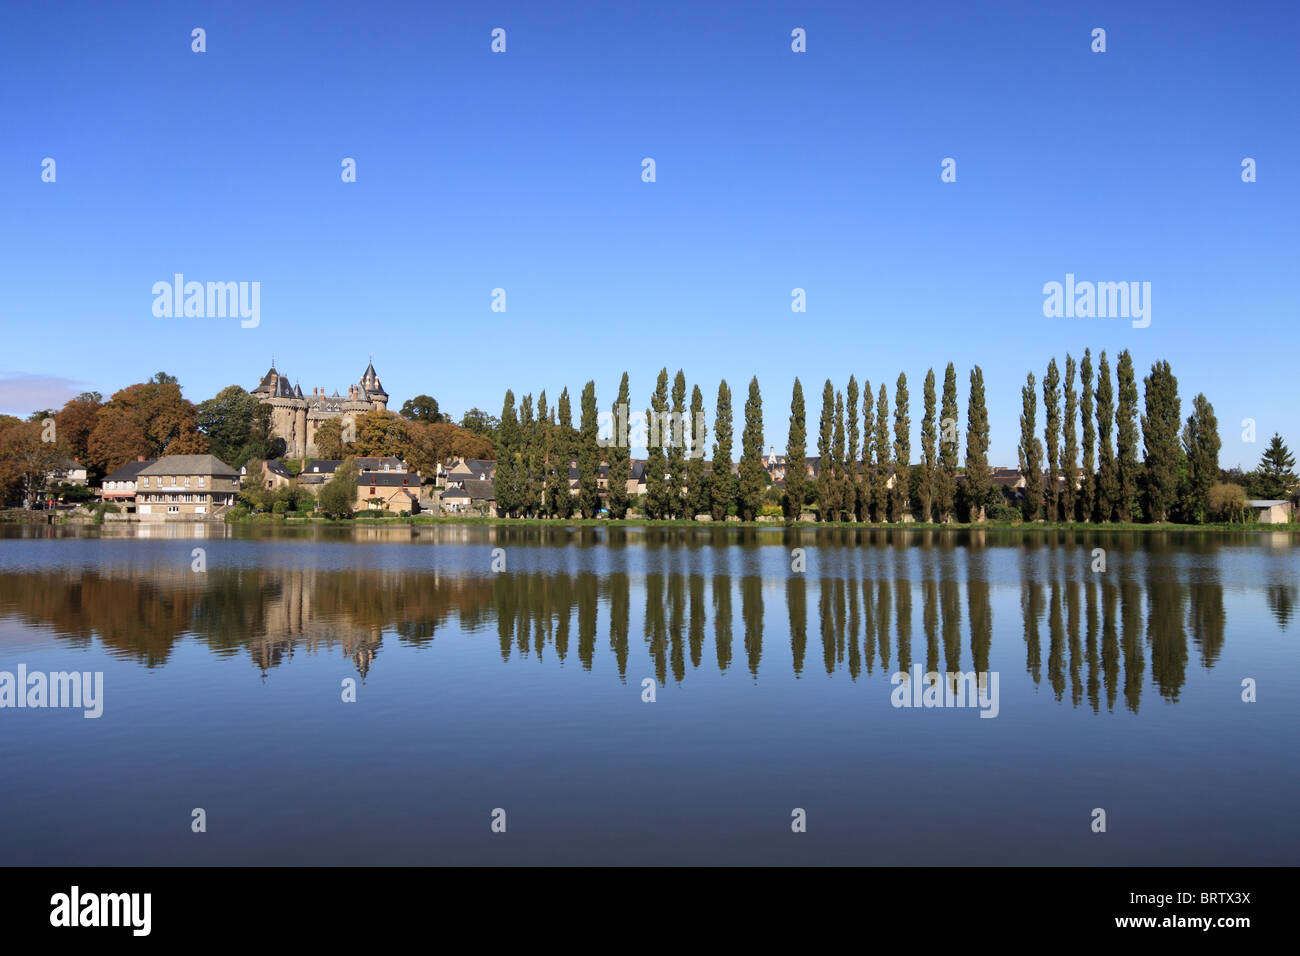 The Château de Combourg and a row of trees, reflected in the waters of Lac Tranquille, in Brittany, northern France Stock Photo